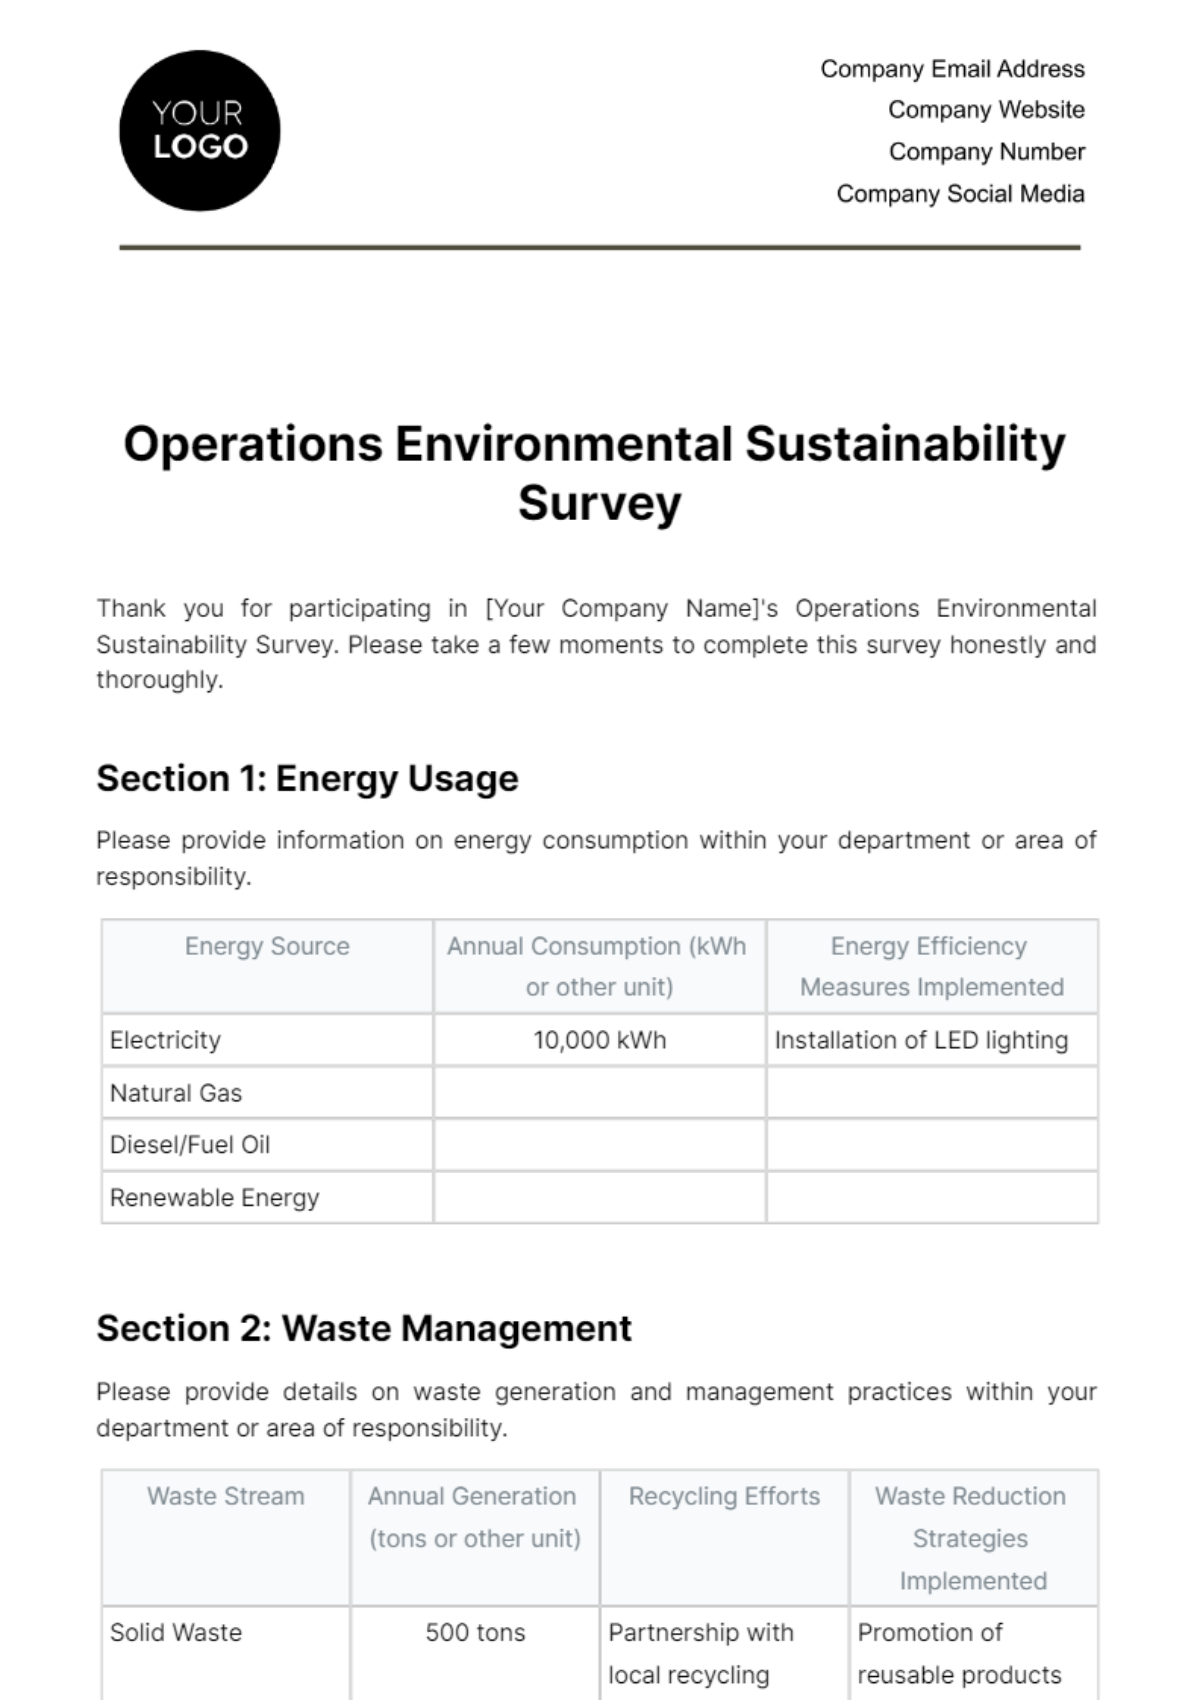 Operations Environmental Sustainability Survey Template